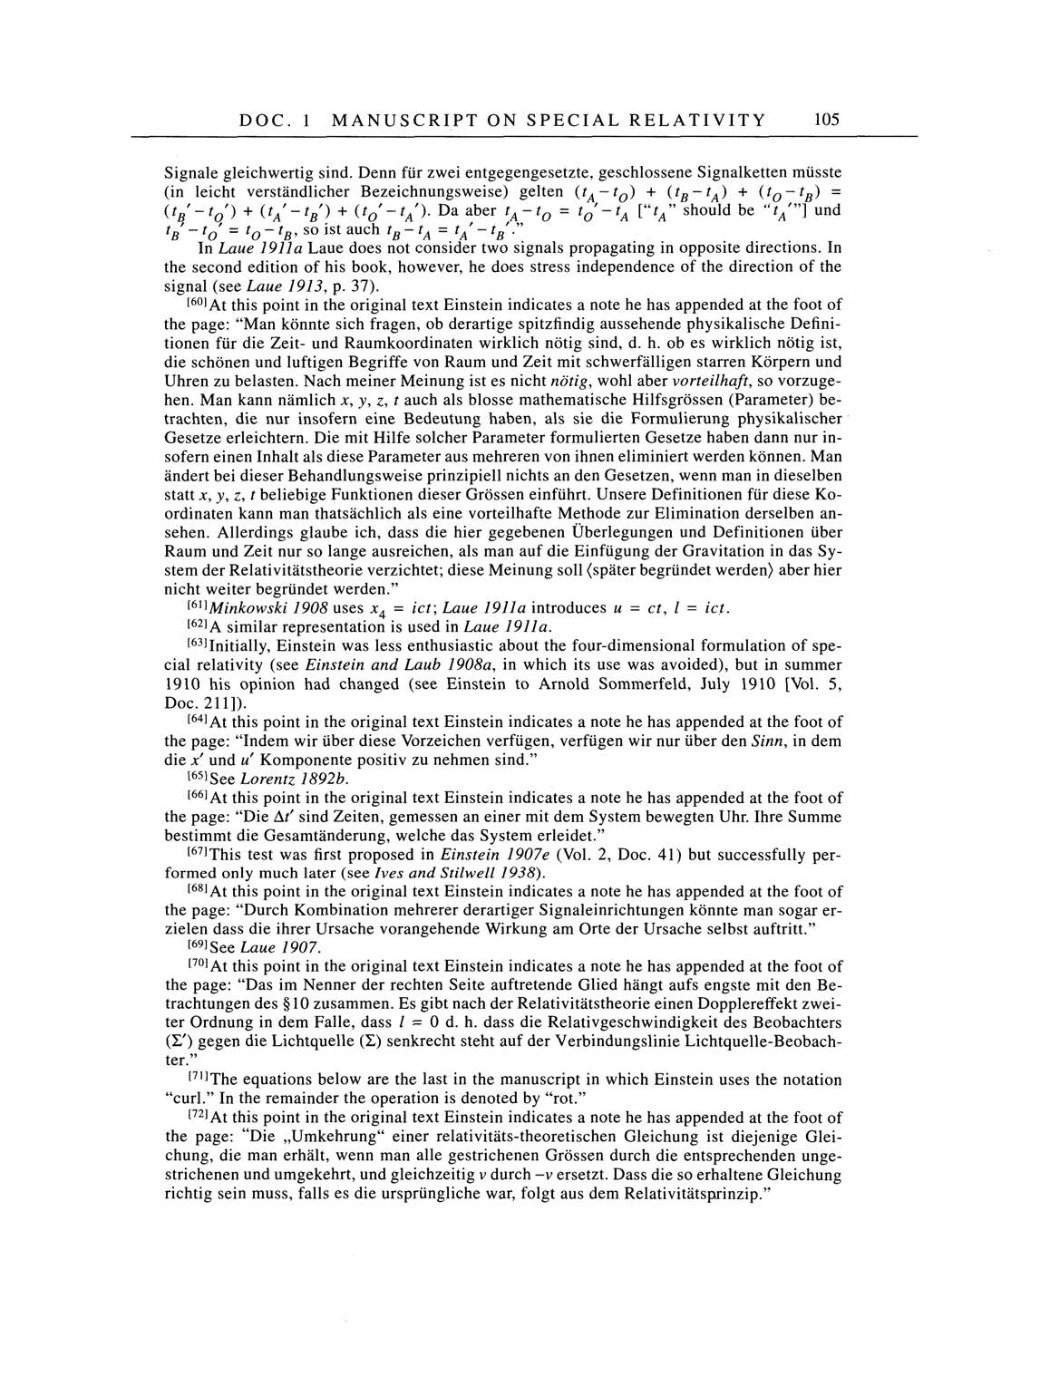 Volume 4: The Swiss Years: Writings 1912-1914 page 105